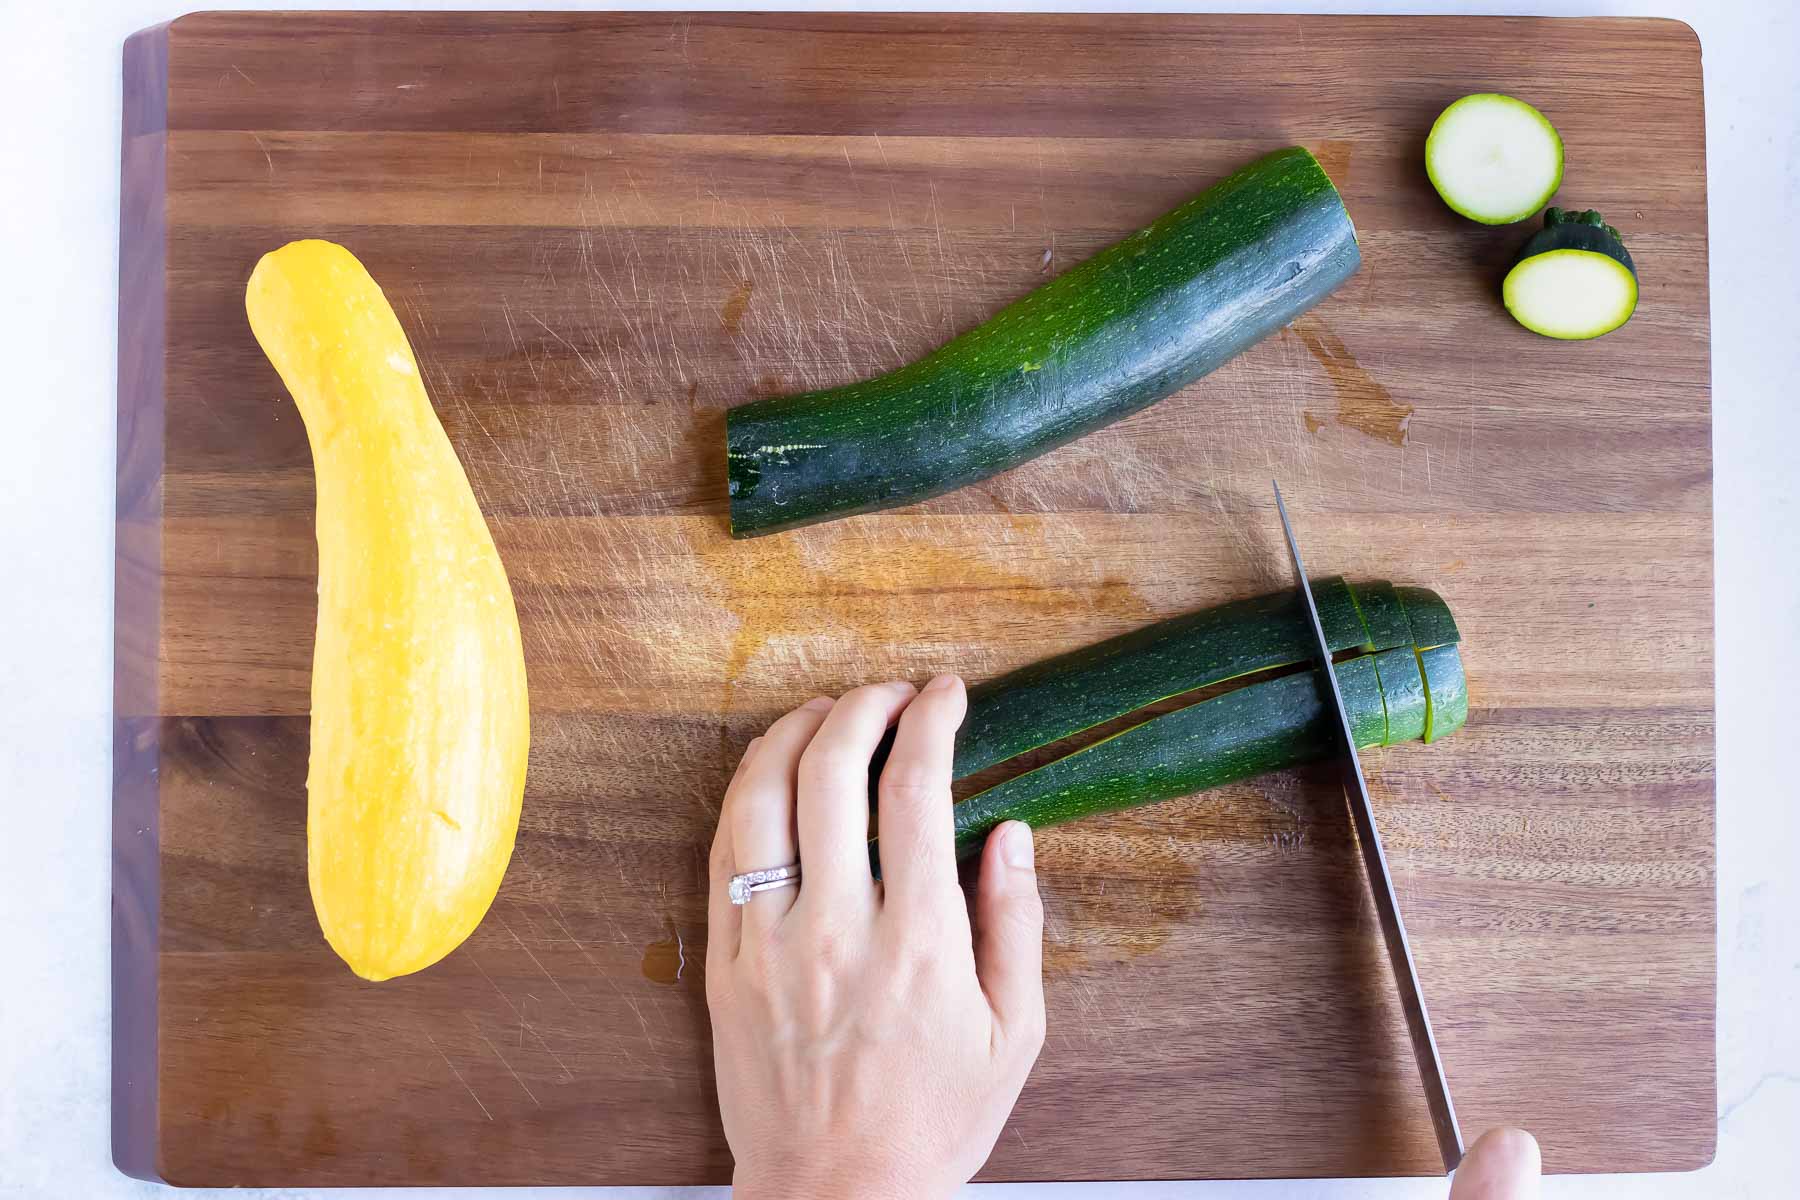 Zucchini and squash are sliced with a sharp knife on a cutting board.